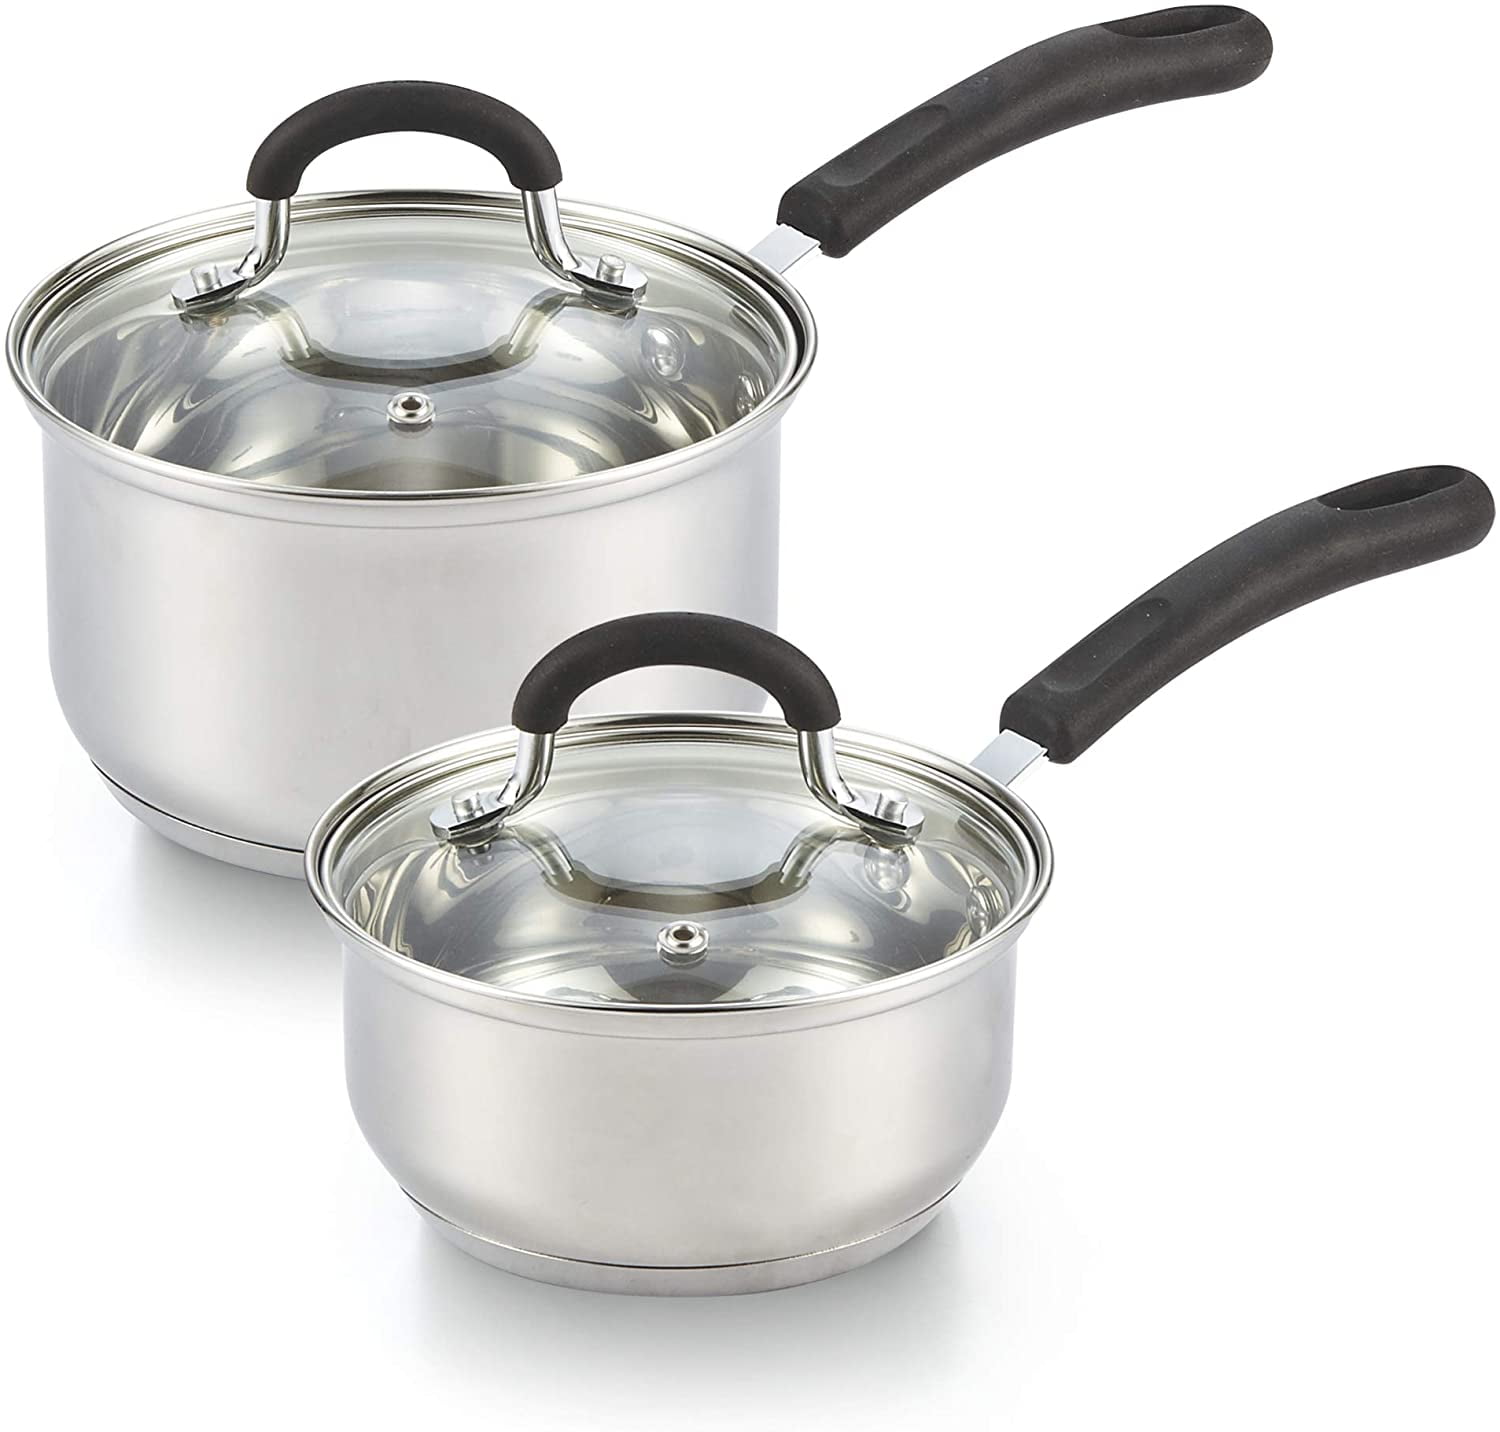 Herogo 1 Quart Saucepan with Lid, 18/10 Stainless Steel Nonstick Small  Sauce Pan Pot, 1Qt Saucepan for Gas Electric Stove Top Camping, Healthy &  Rust